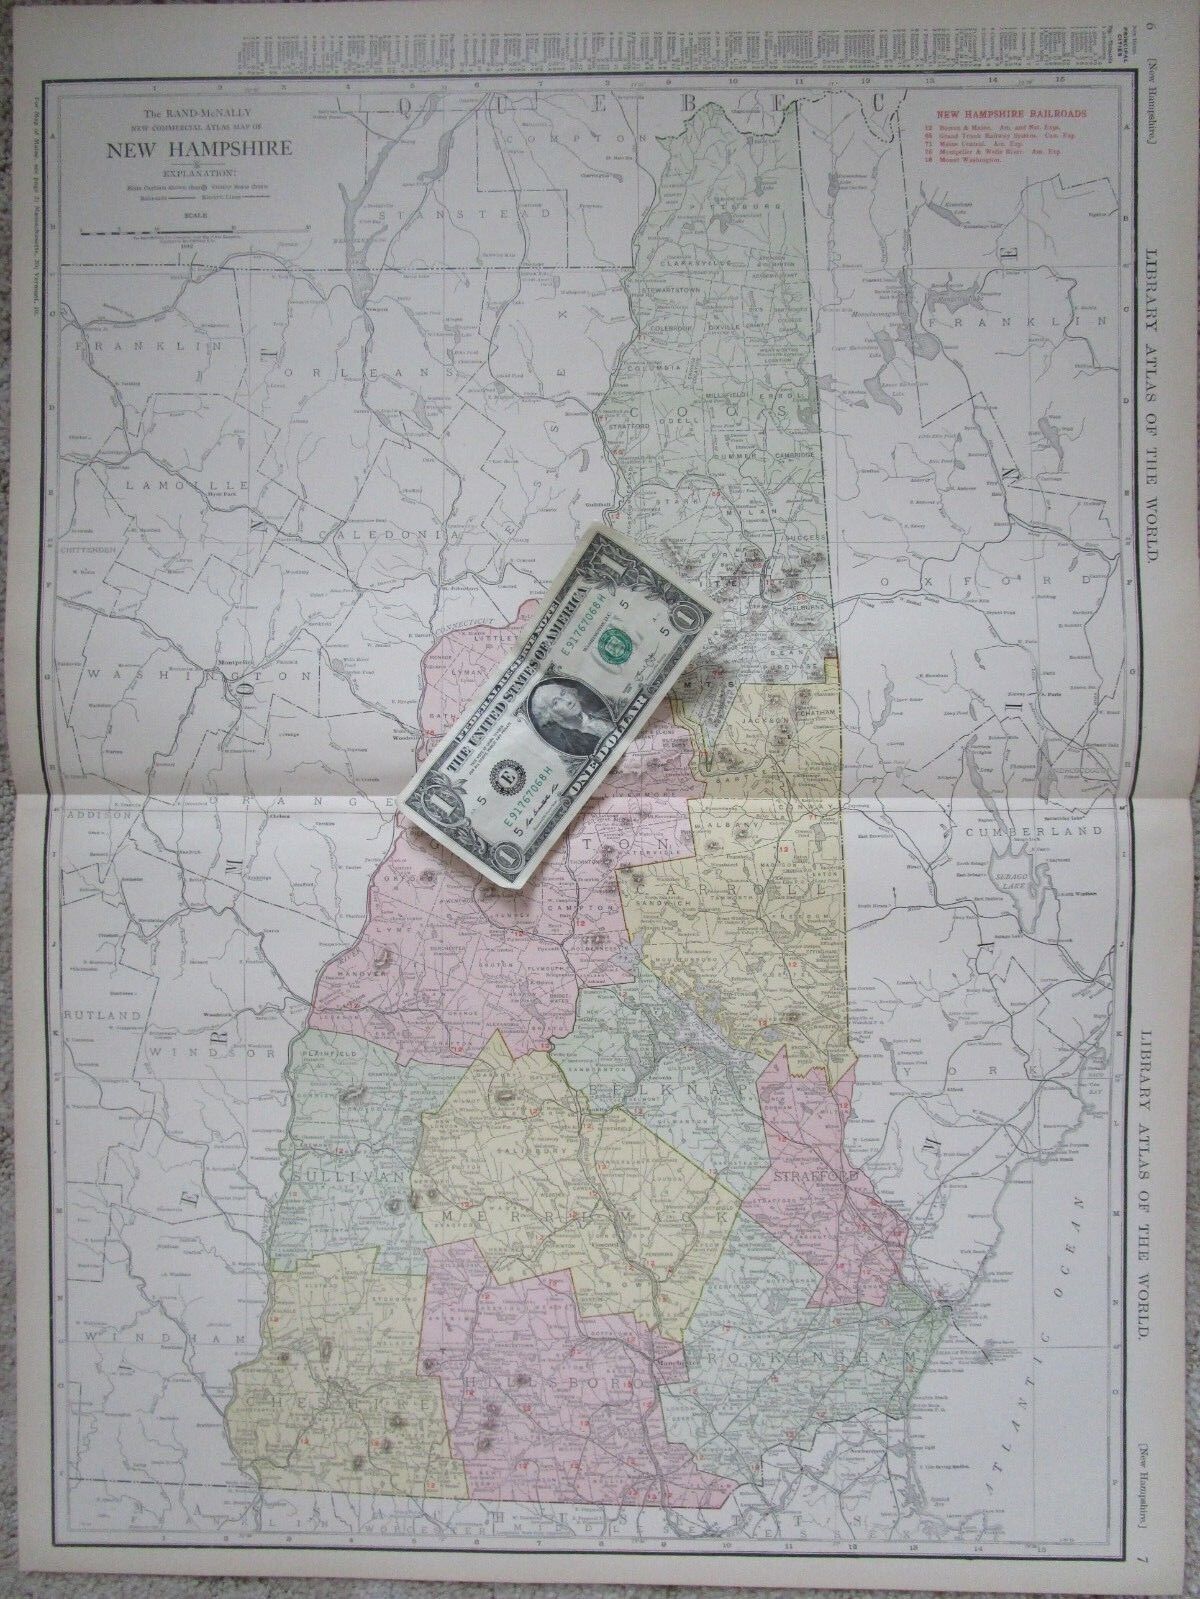 Nh Lg 1912 Dated New Hampshire Railroad Map 1910s Montpelier Wells